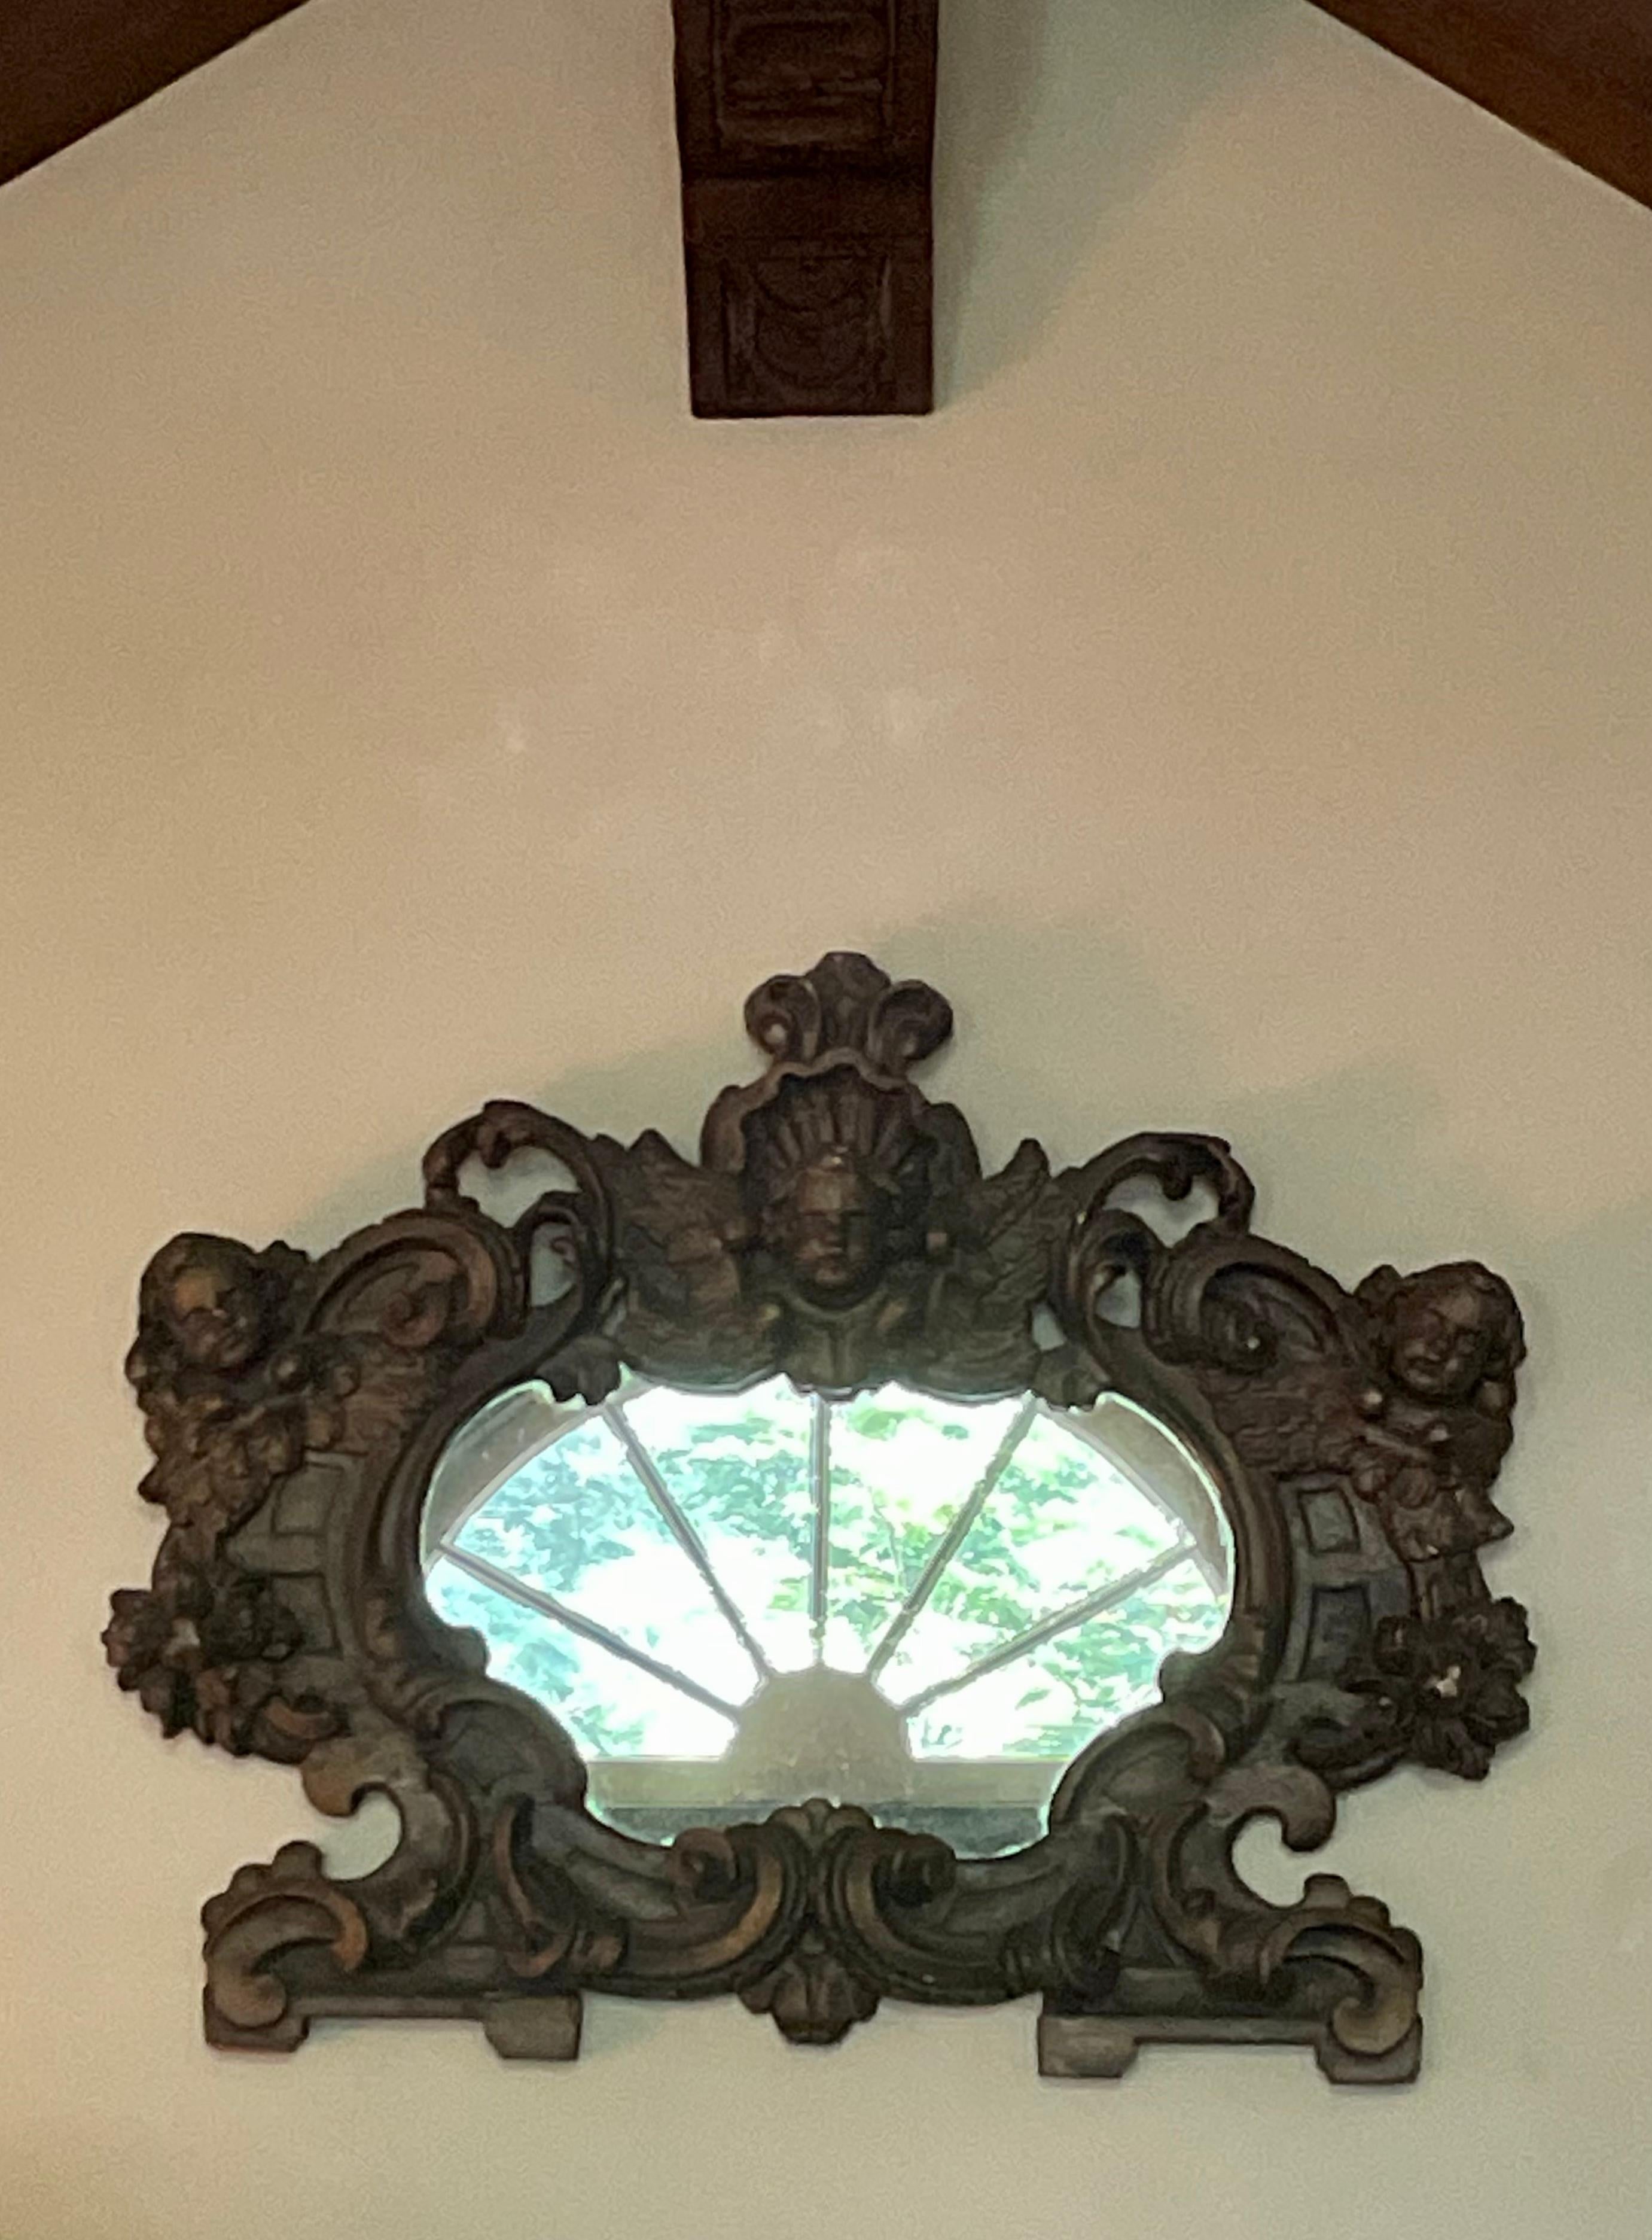 Italian Neo-Baroque mirror. Baroque style mirror with scrolling cartouche frame with putti. Perfect above an entry or in a grouping. 
Dimensions: 24” W x 20” H x 4” Deep.